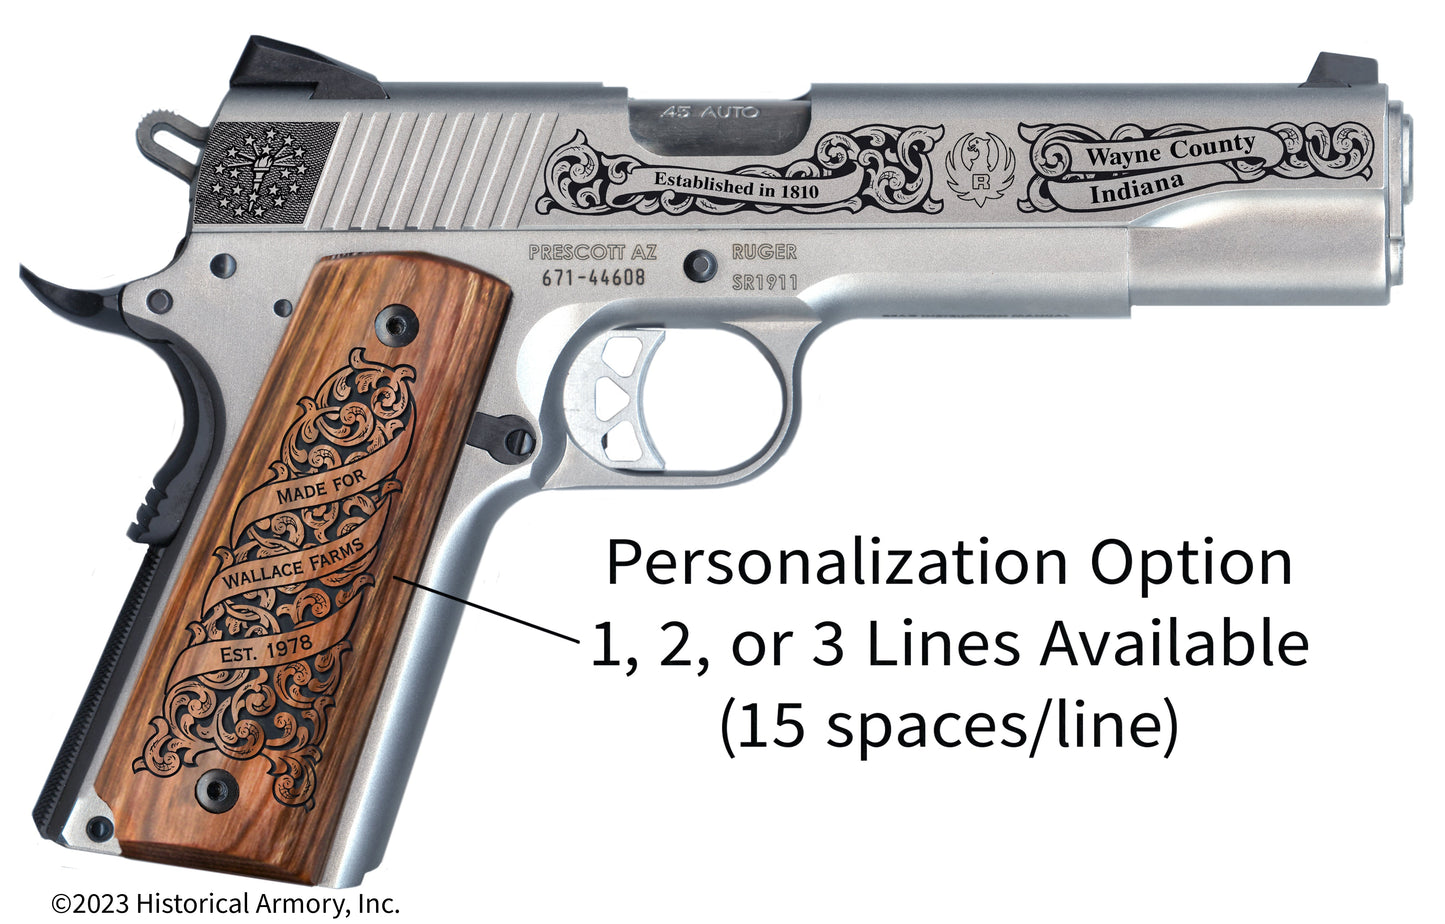 Wayne County Indiana Personalized Engraved .45 Auto Ruger 1911